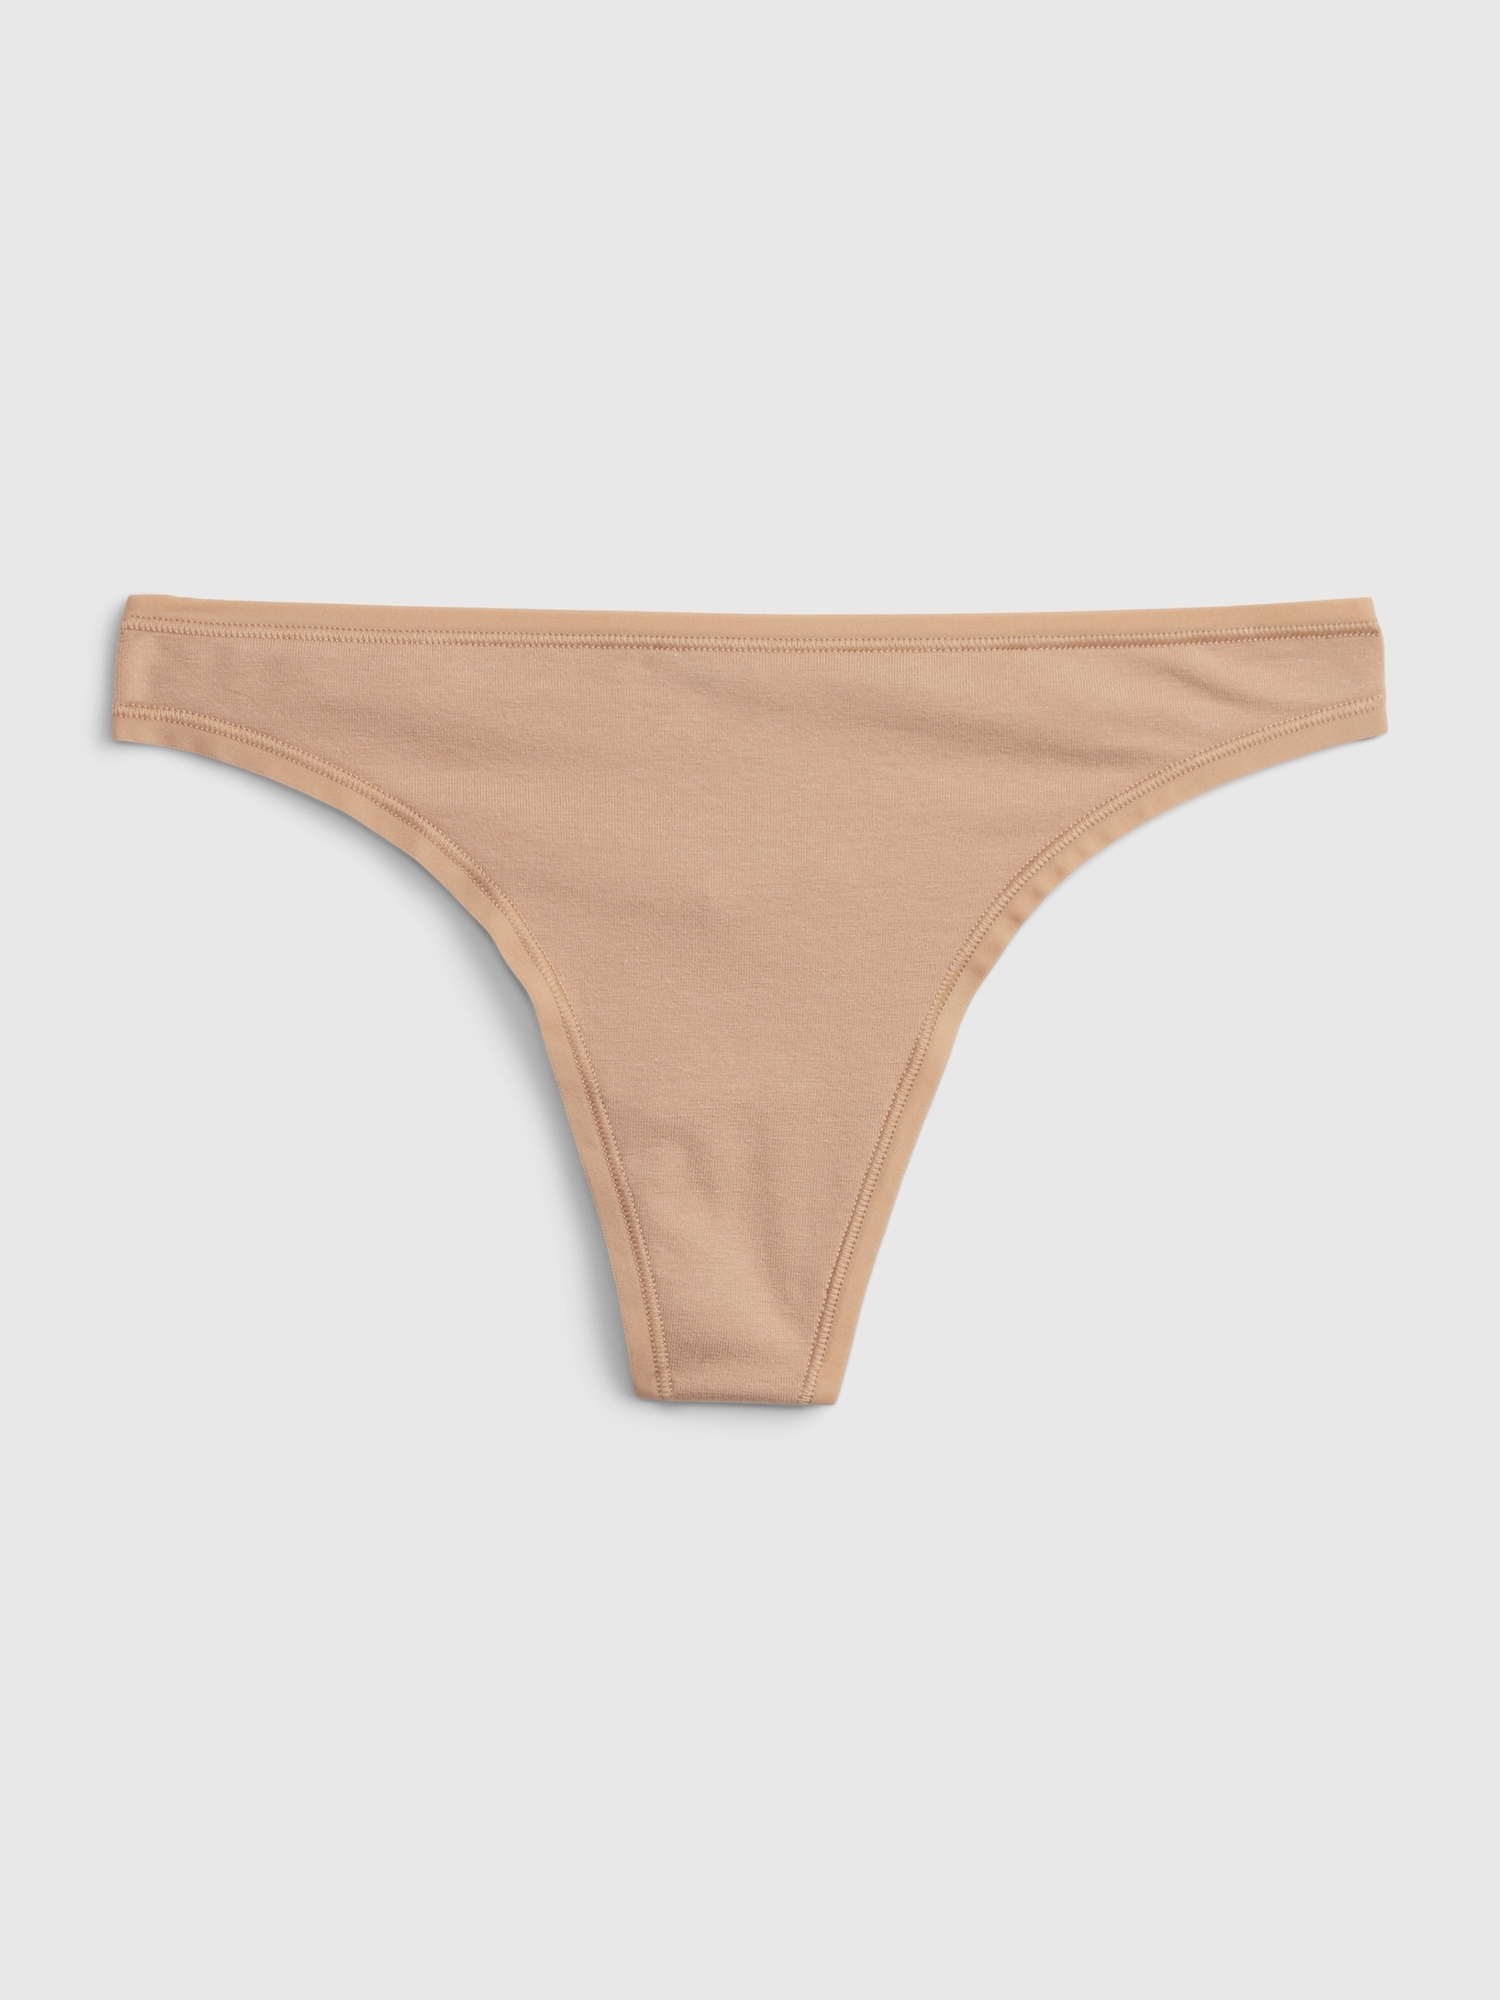 Cottonhill Basic Cotton Thong Women Panty Daily Essential Sexy